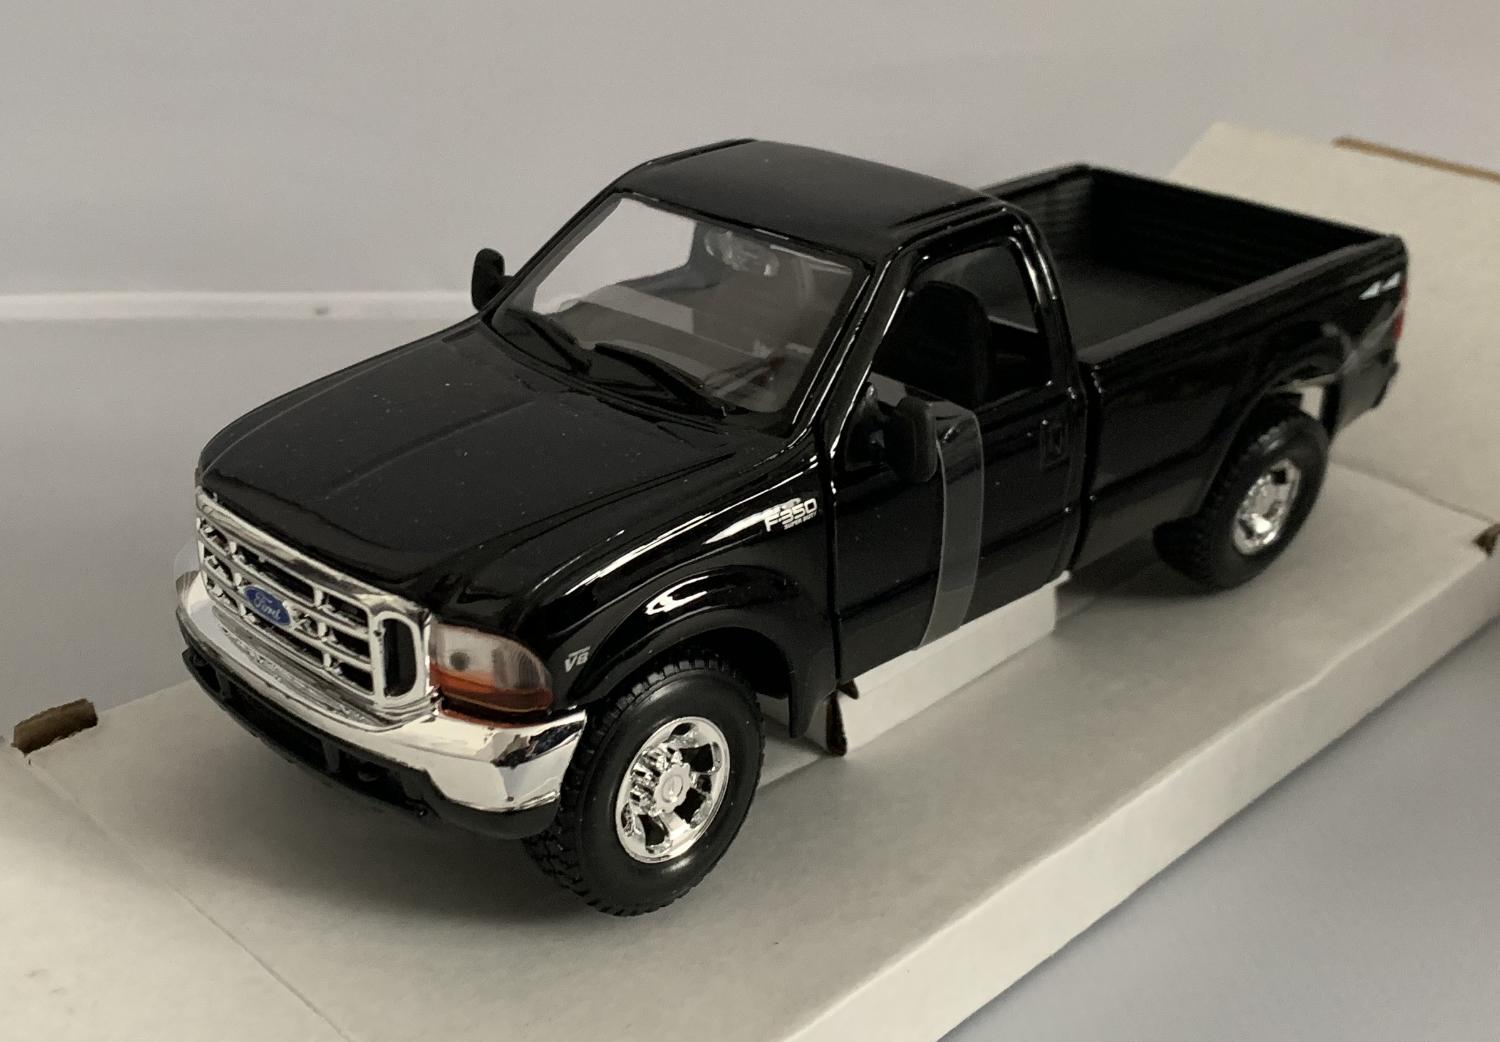 An excellent scale model of a Ford F-350 Super Duty Pickup decorated in black with chrome wheels